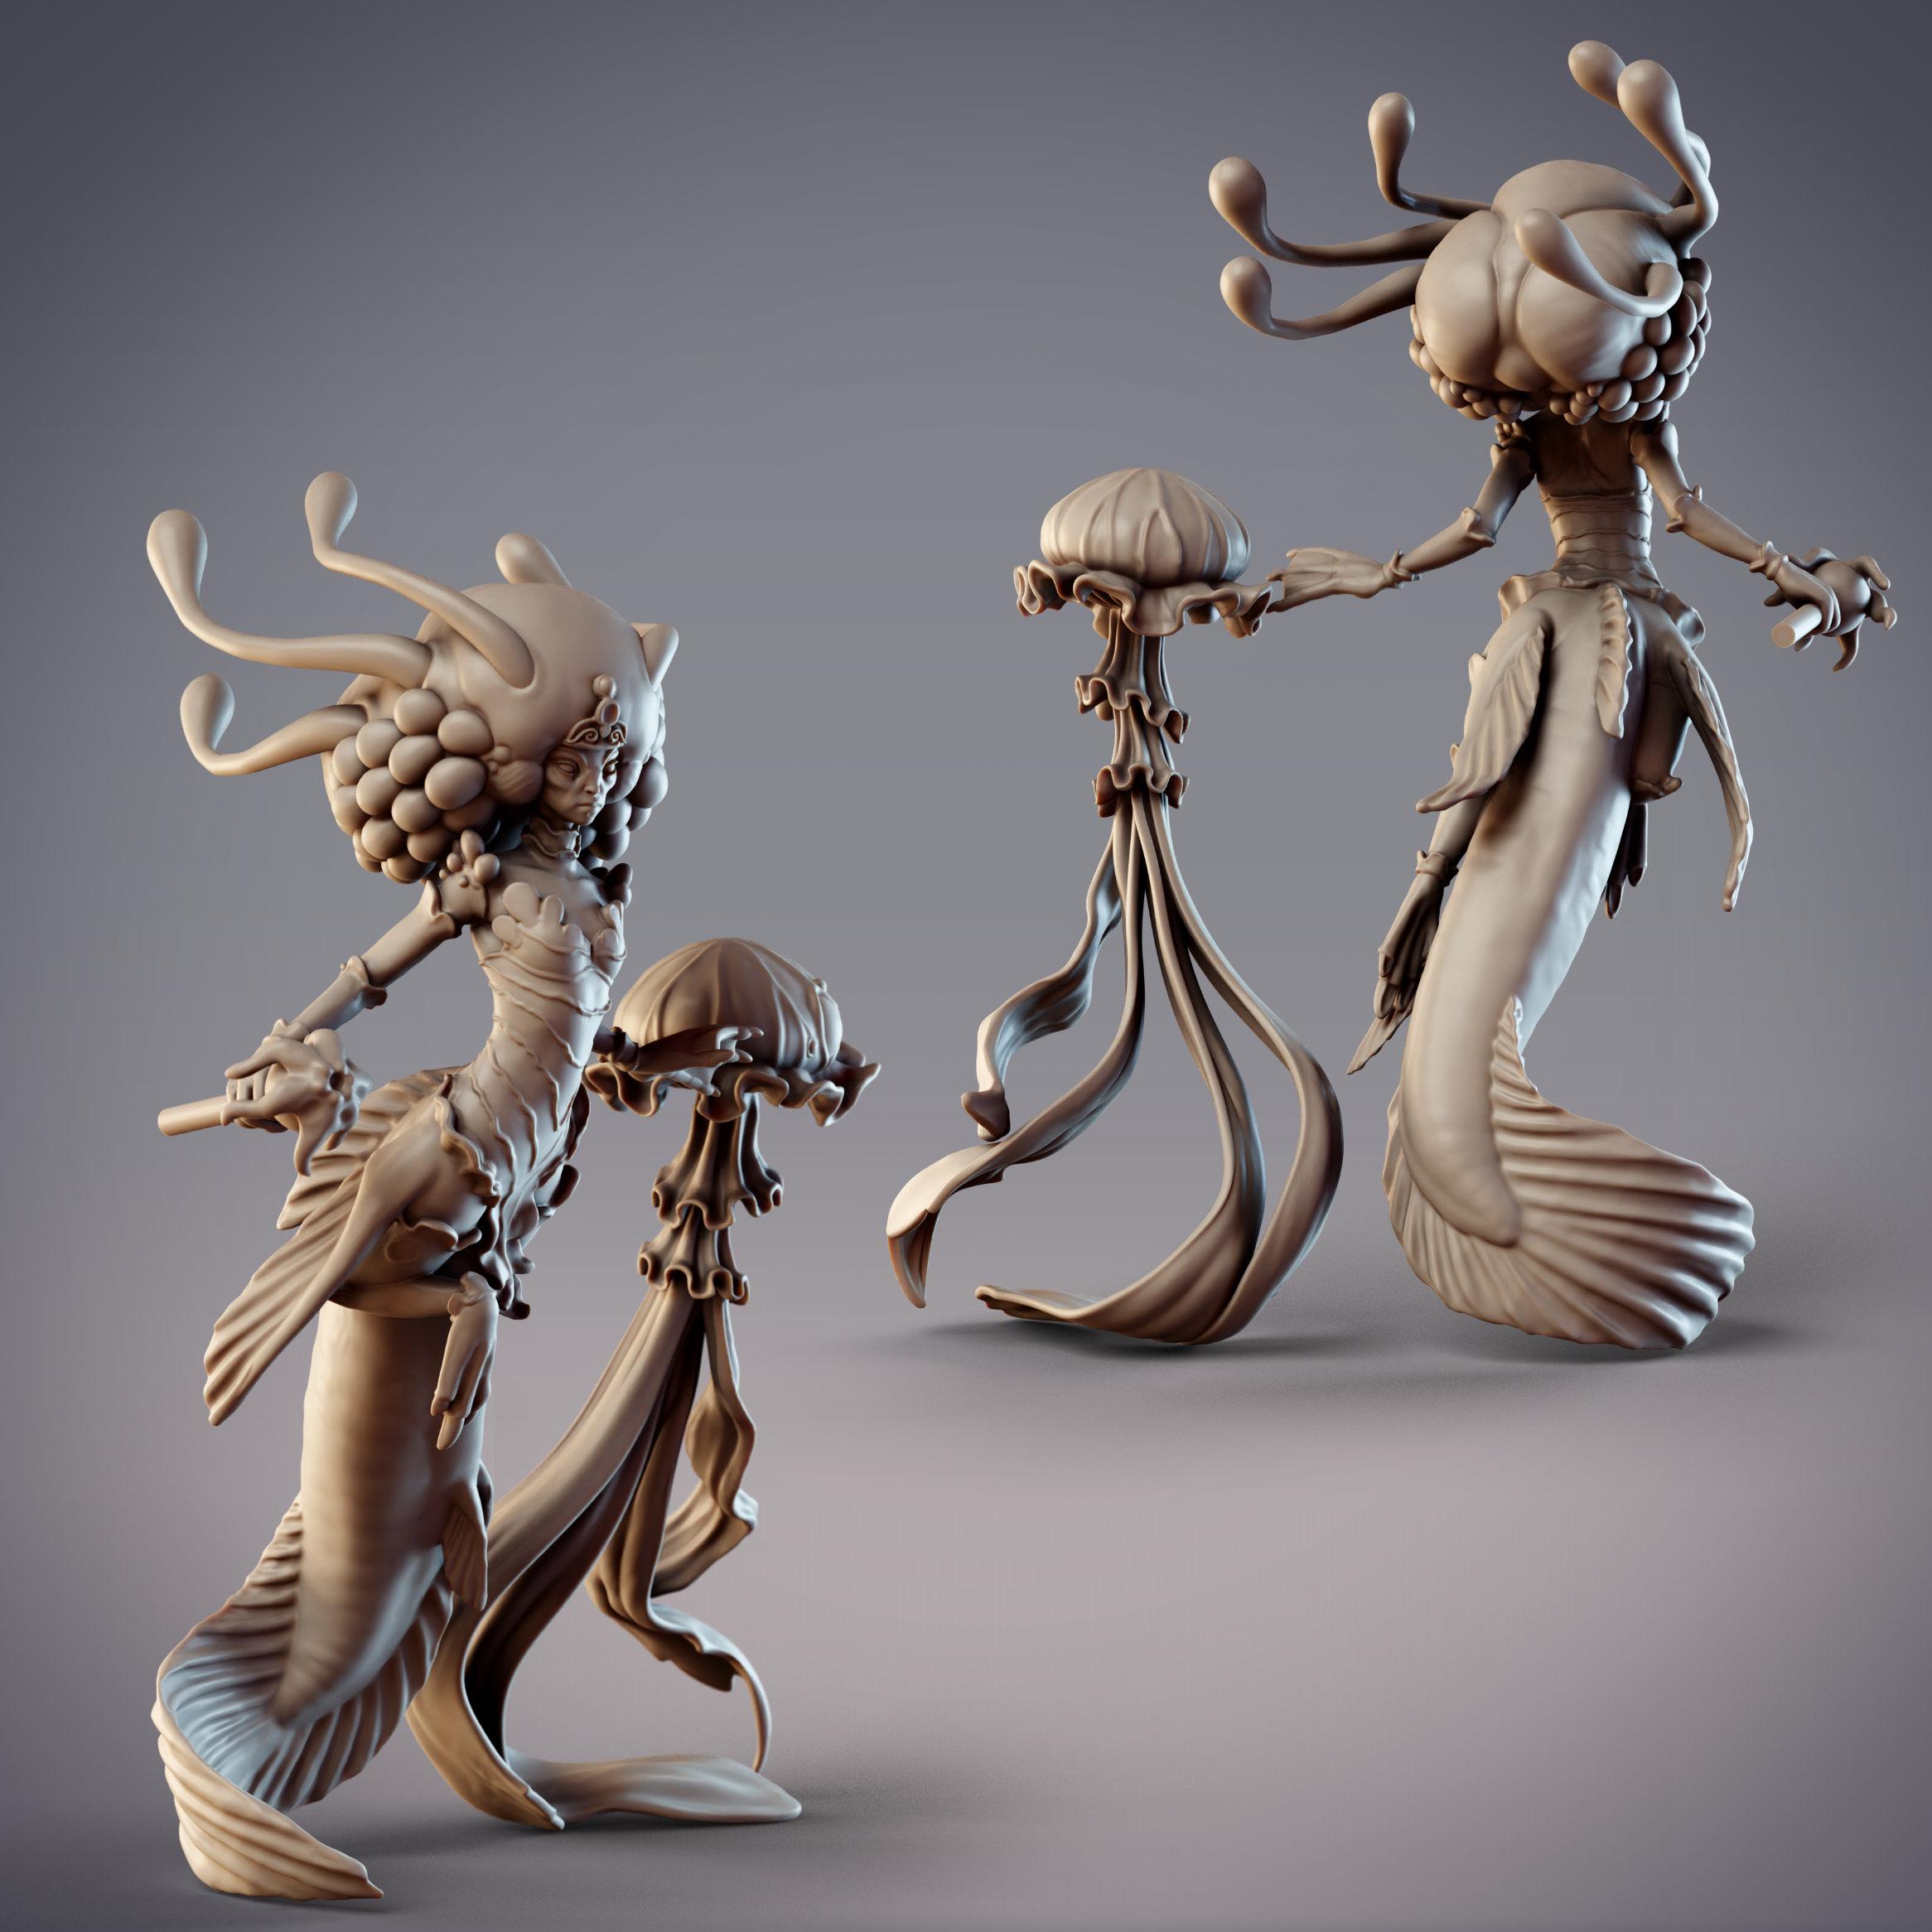 Mermaid Caster - Melusine, Lemurian Jellyfish Mage (Pre-Supported) 3d model